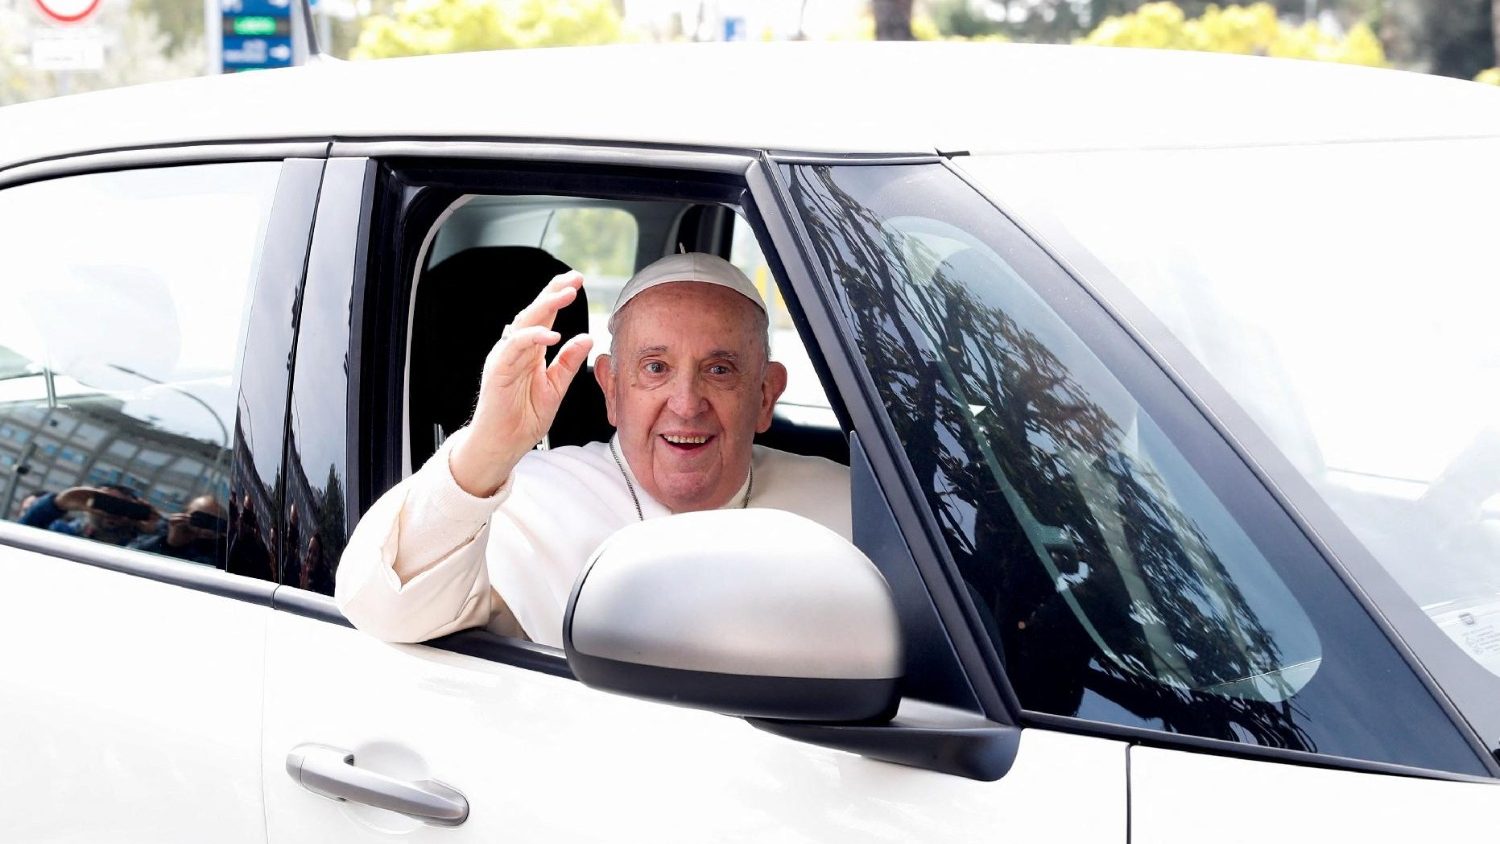 Pope Francis returns home after brief hospital stay - Vatican News